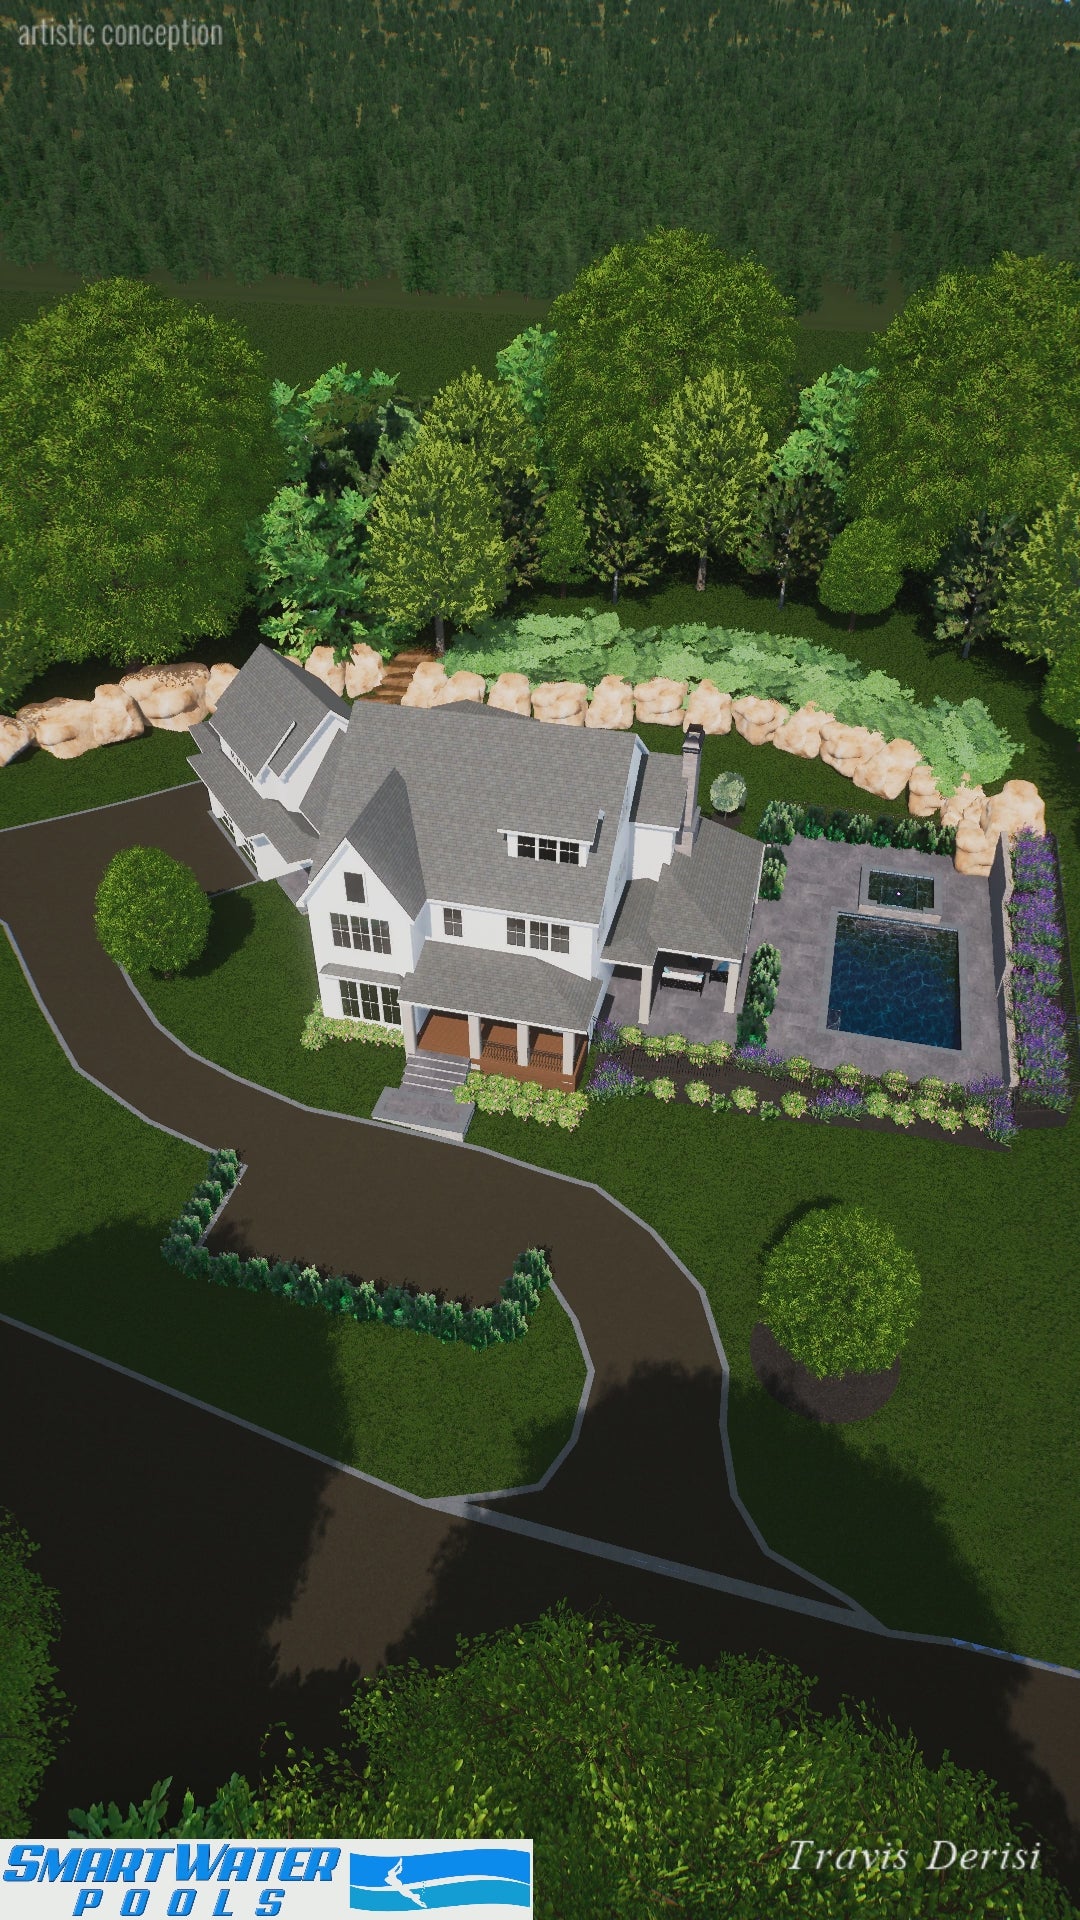 3D DESIGN SERVICES FROM SMARTWATER POOLS IN BERGEN COUNTY NJ